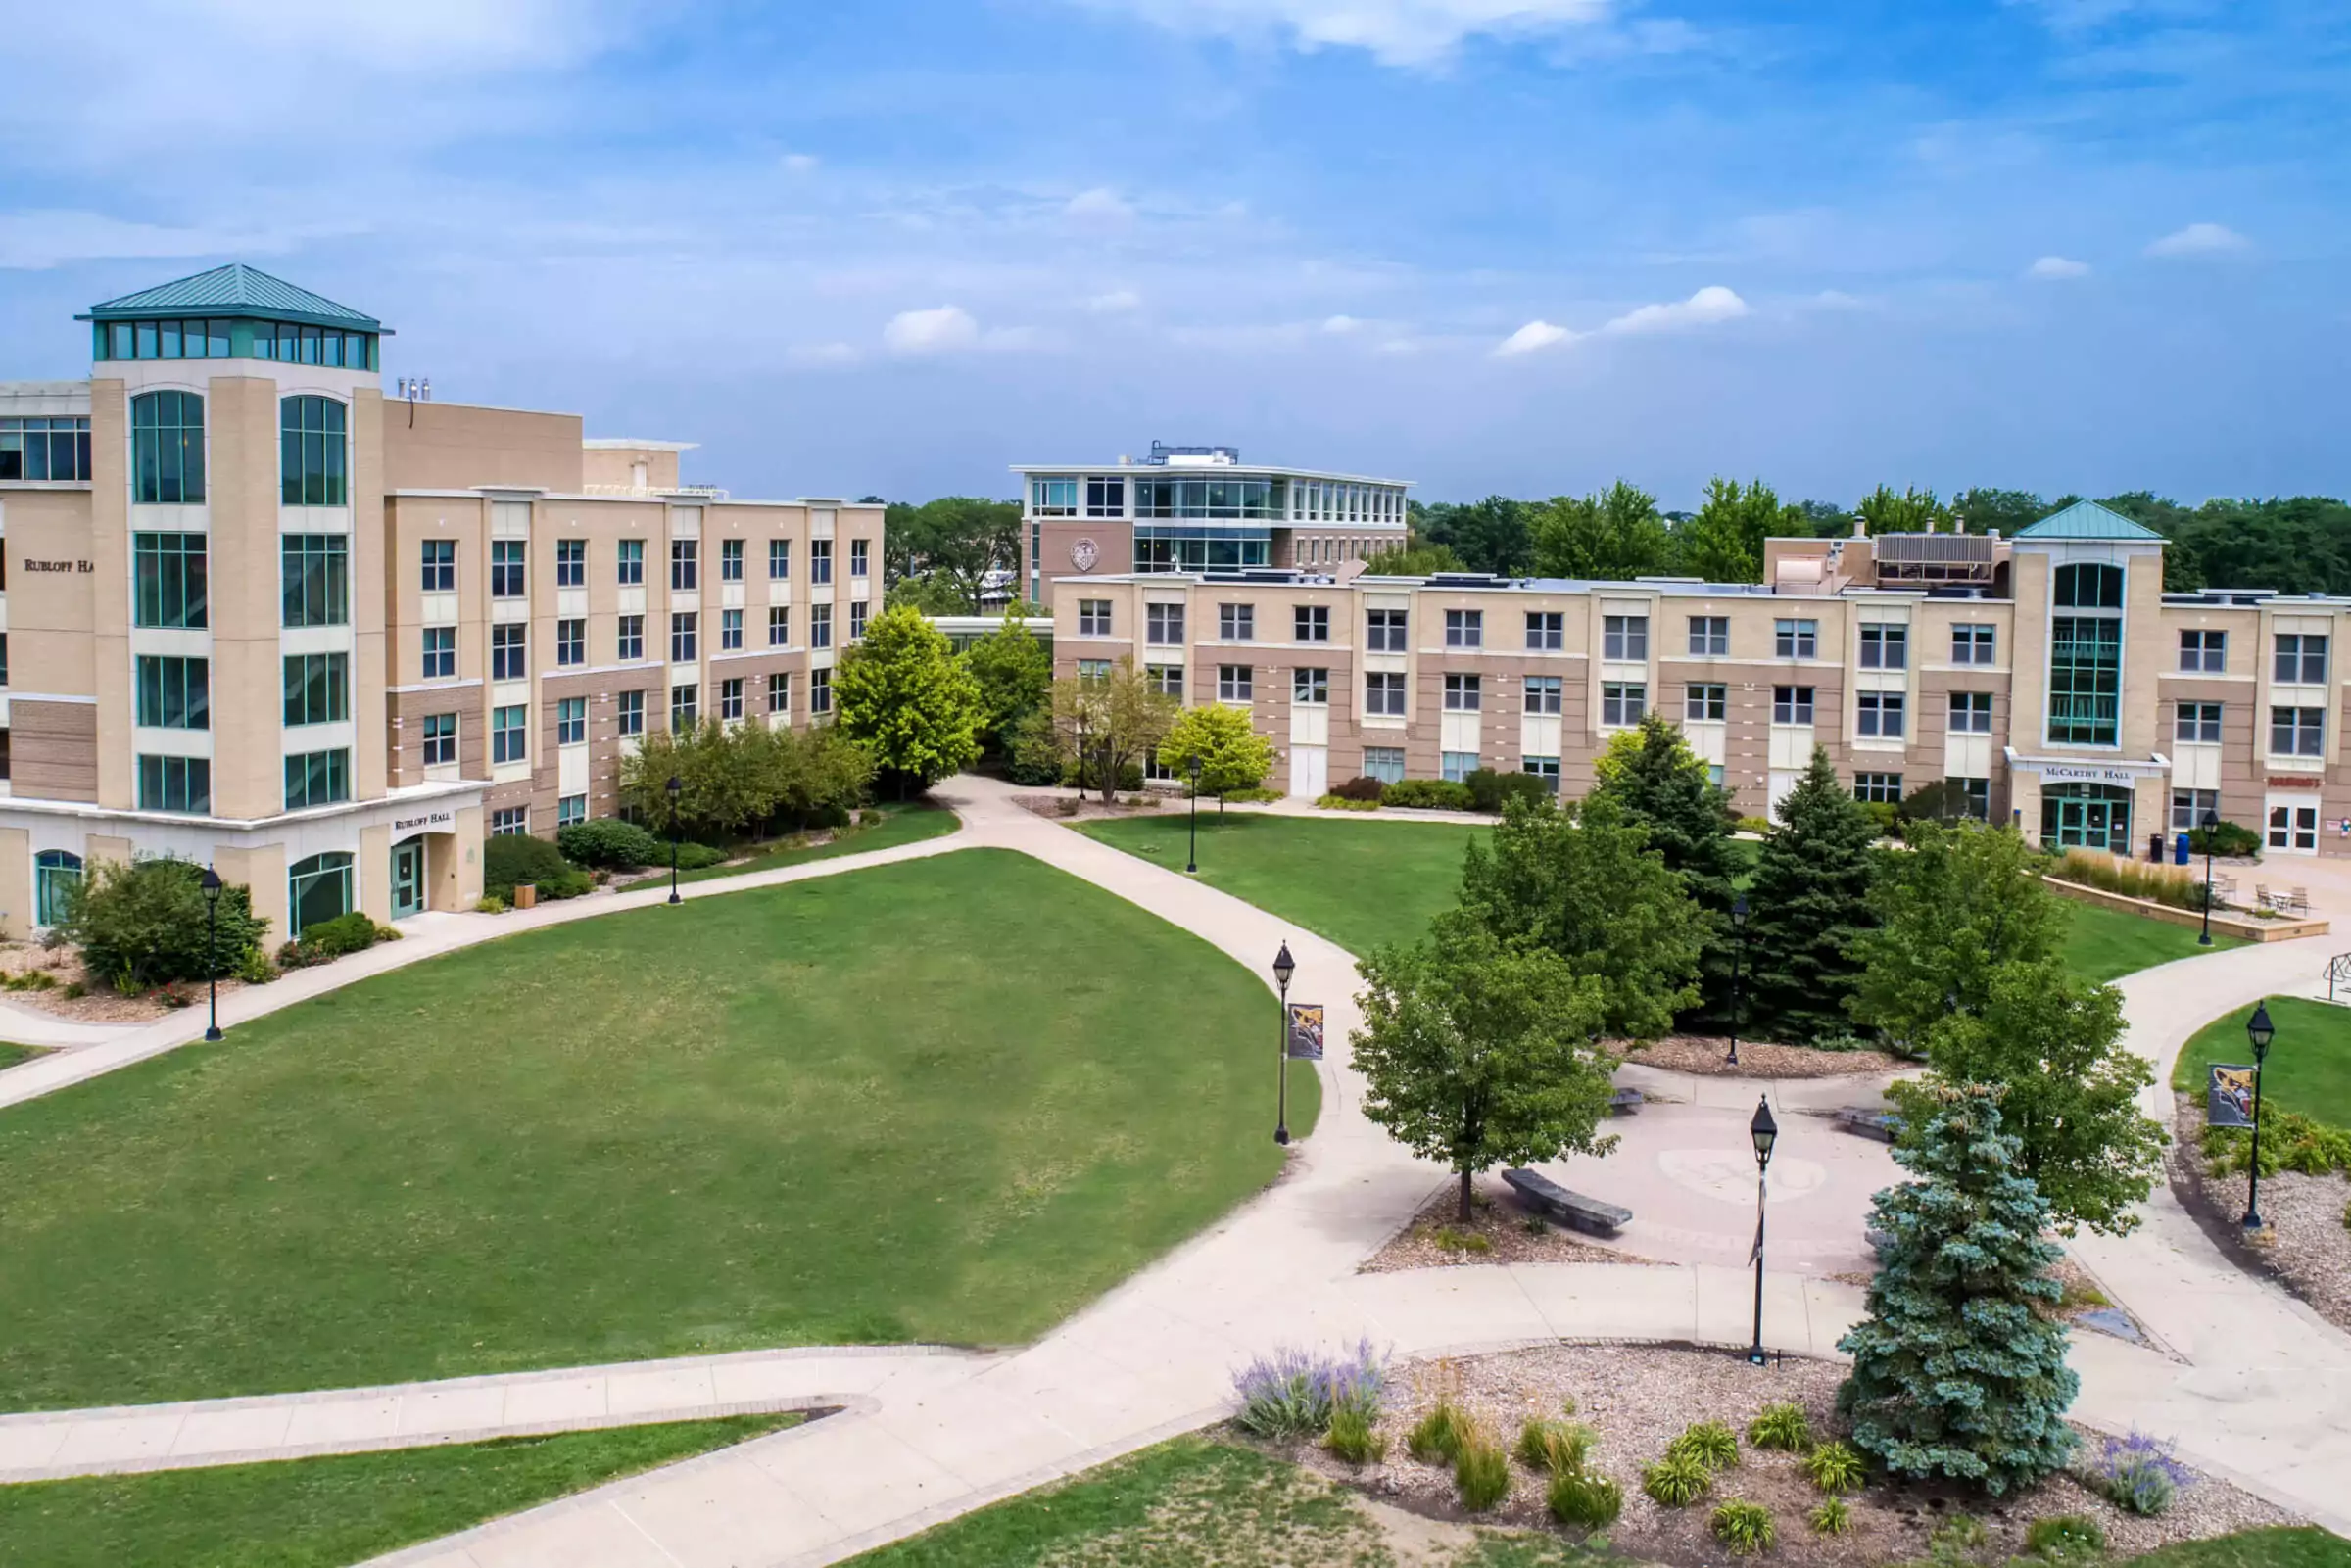 St. Xavier University Deploys YuJa Panorama for Digital Accessibility to Drive Inclusivity Campuswide